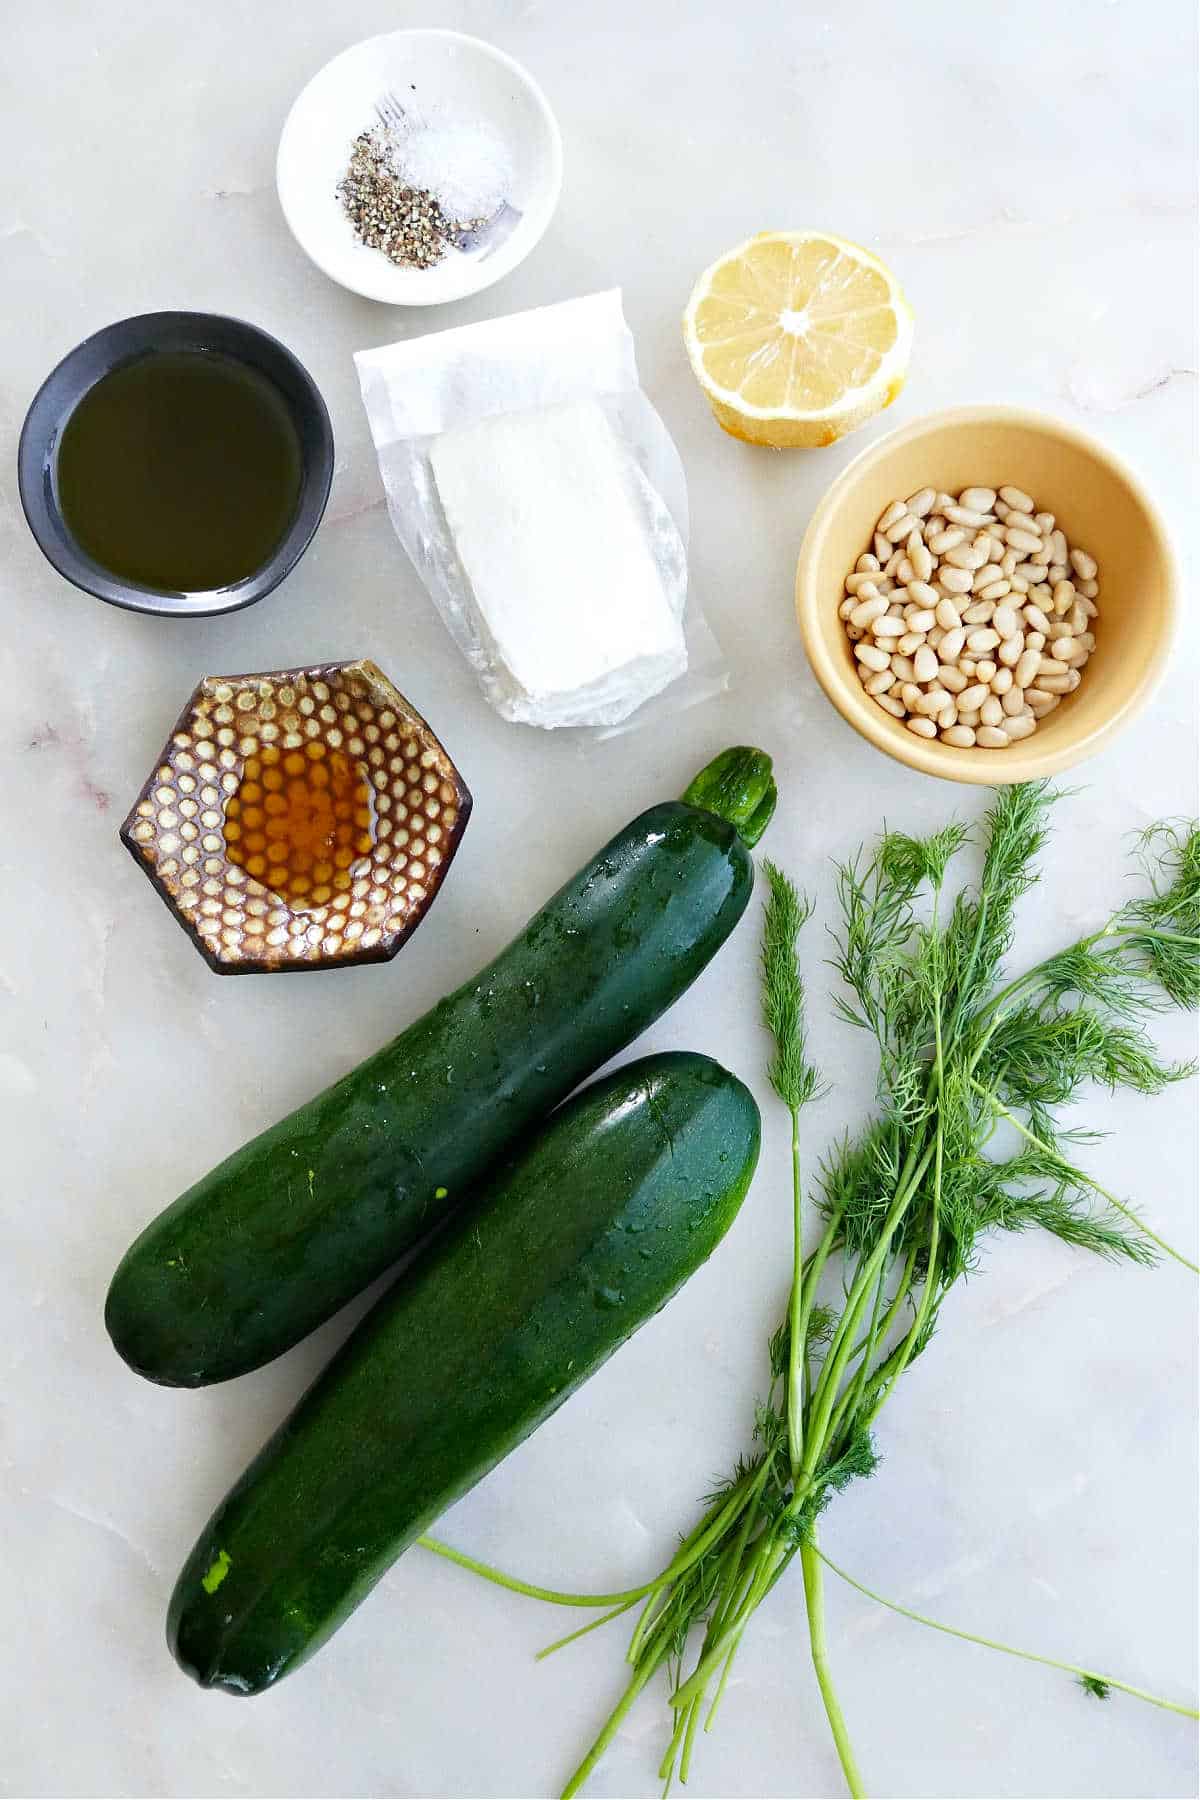 zucchini, dill, pine nuts, lemon, goat cheese, olive oil, honey, salt, and pepper